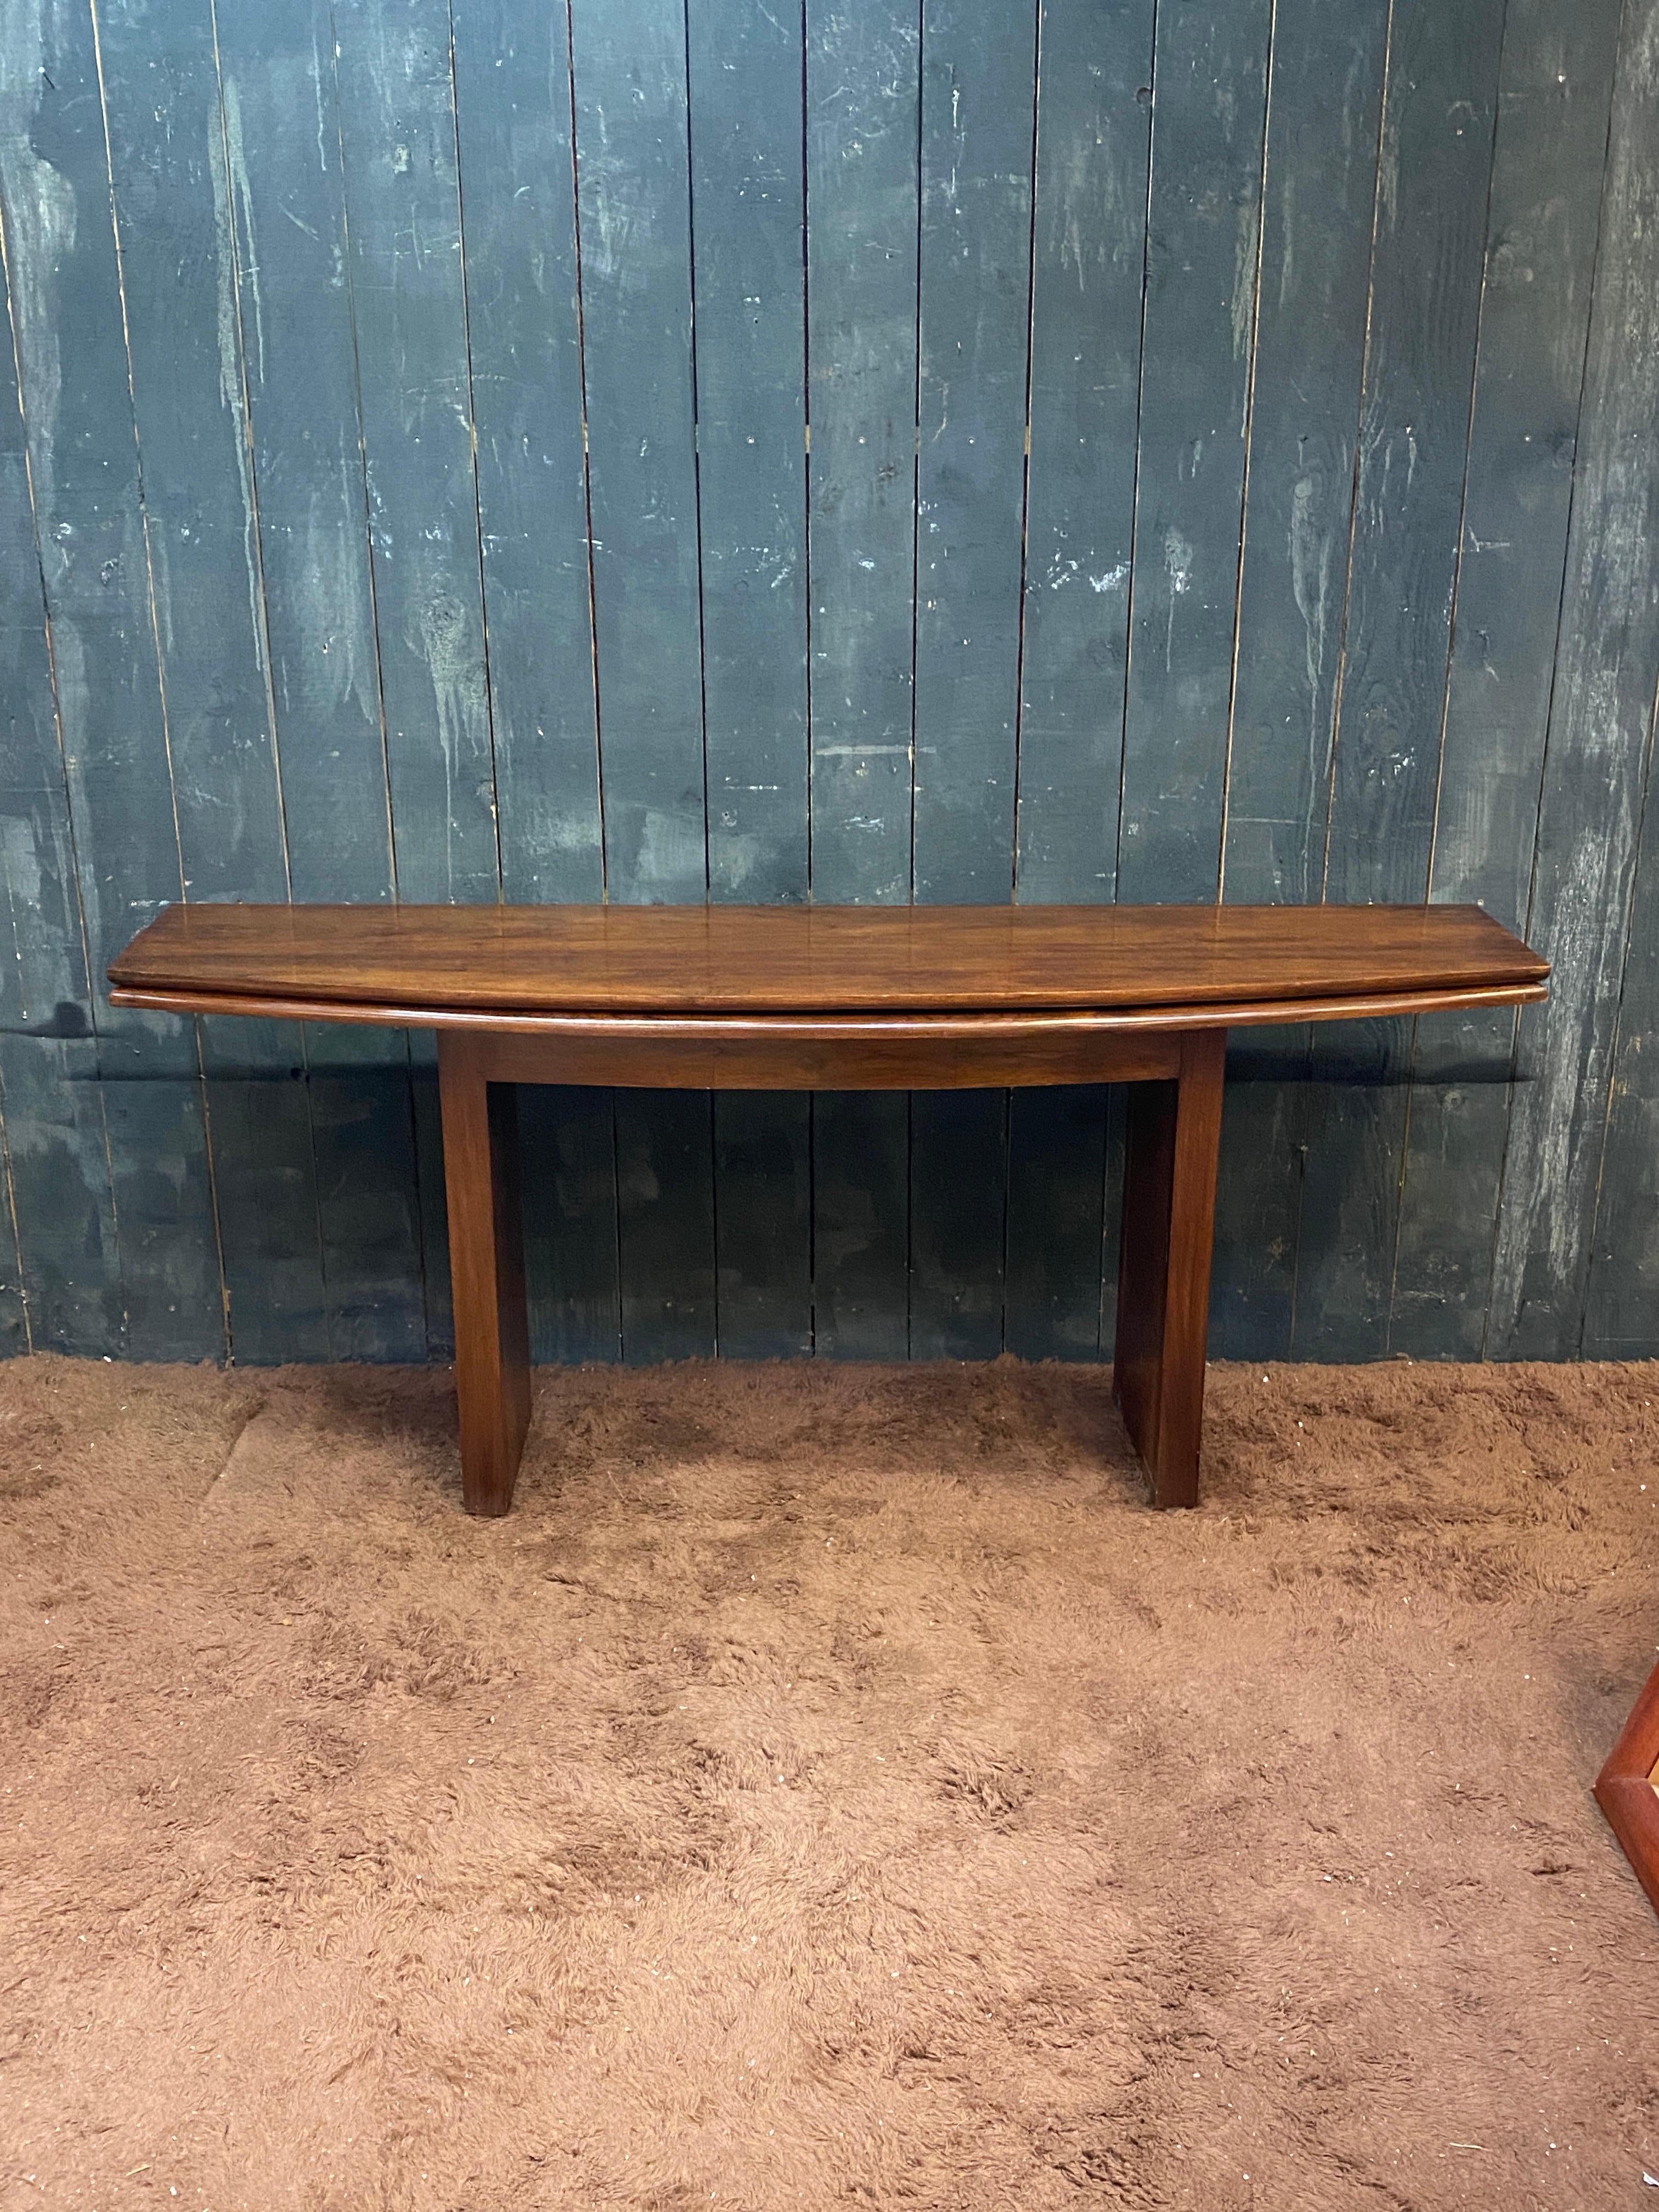 elegant large teak table/console circa 1960
Open it's a dinner table
open : 30